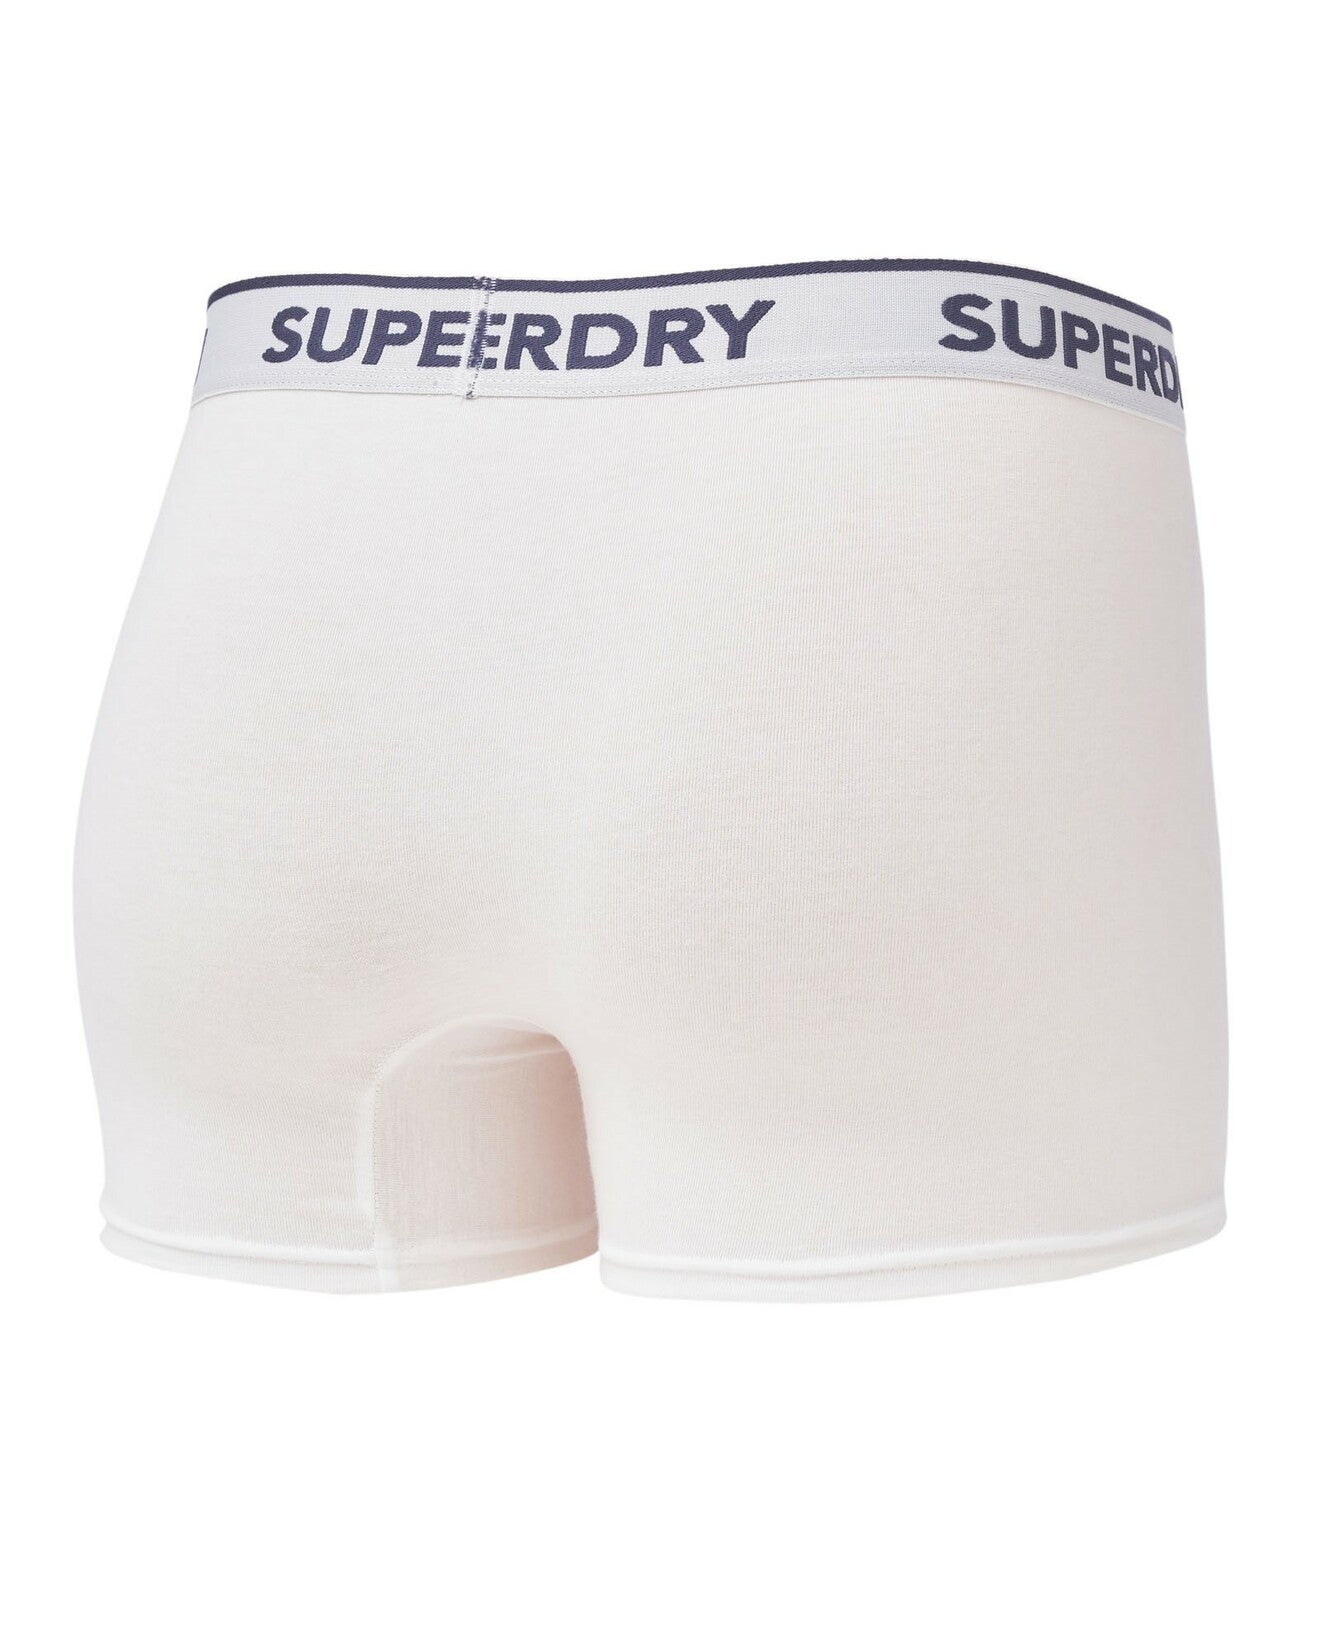 SUPERDRY - Multi Classic Boxer Triple Pack in Optic White